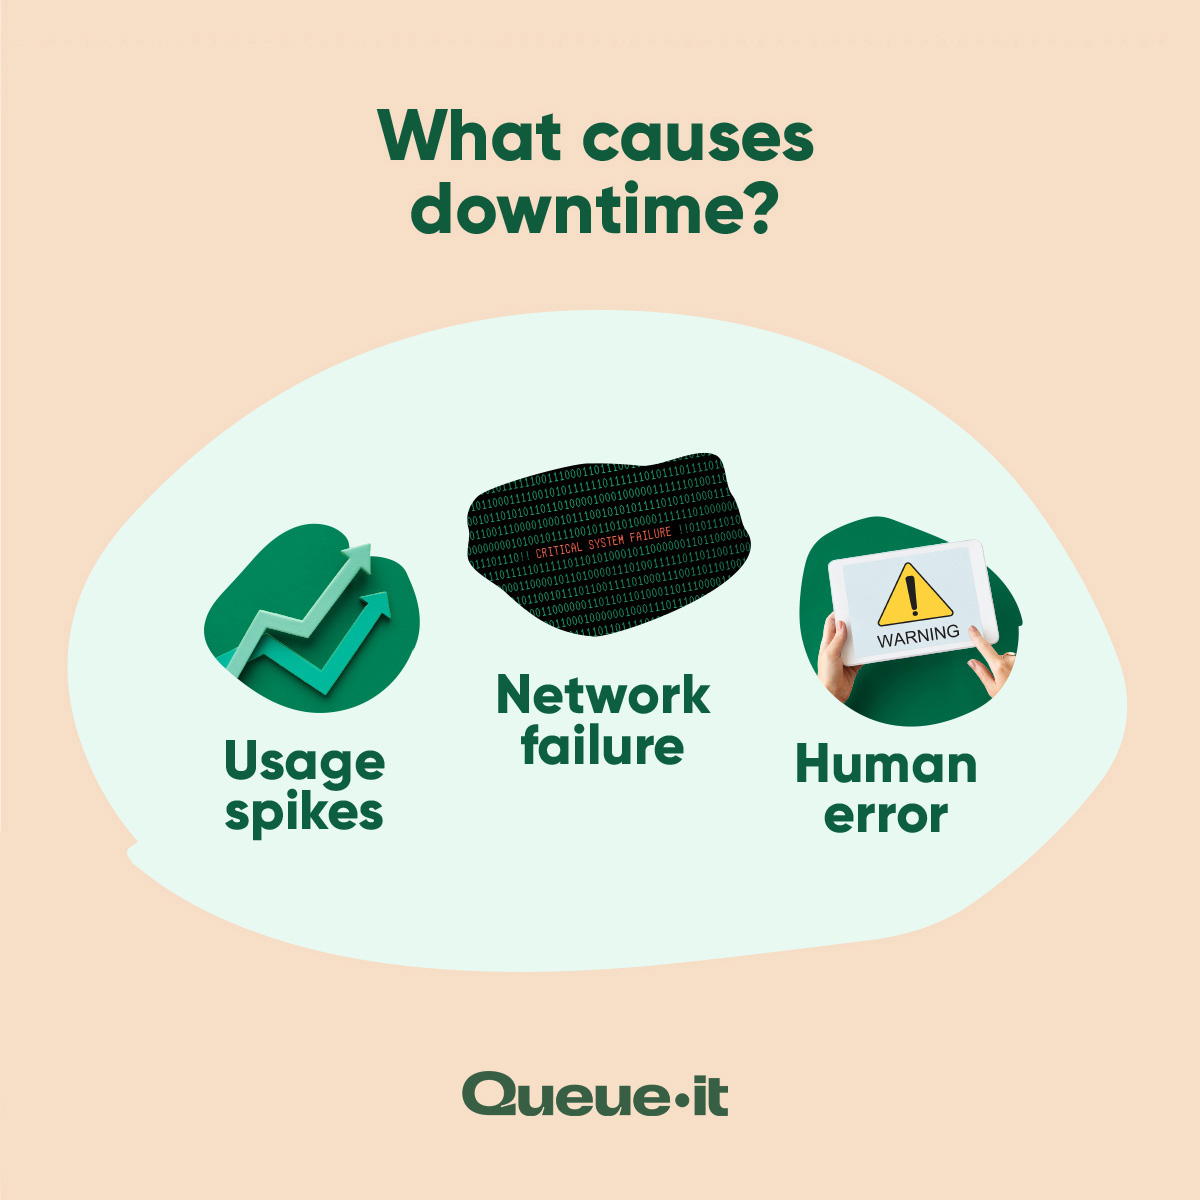 What causes downtime? Usage spikes, network failure, and human error